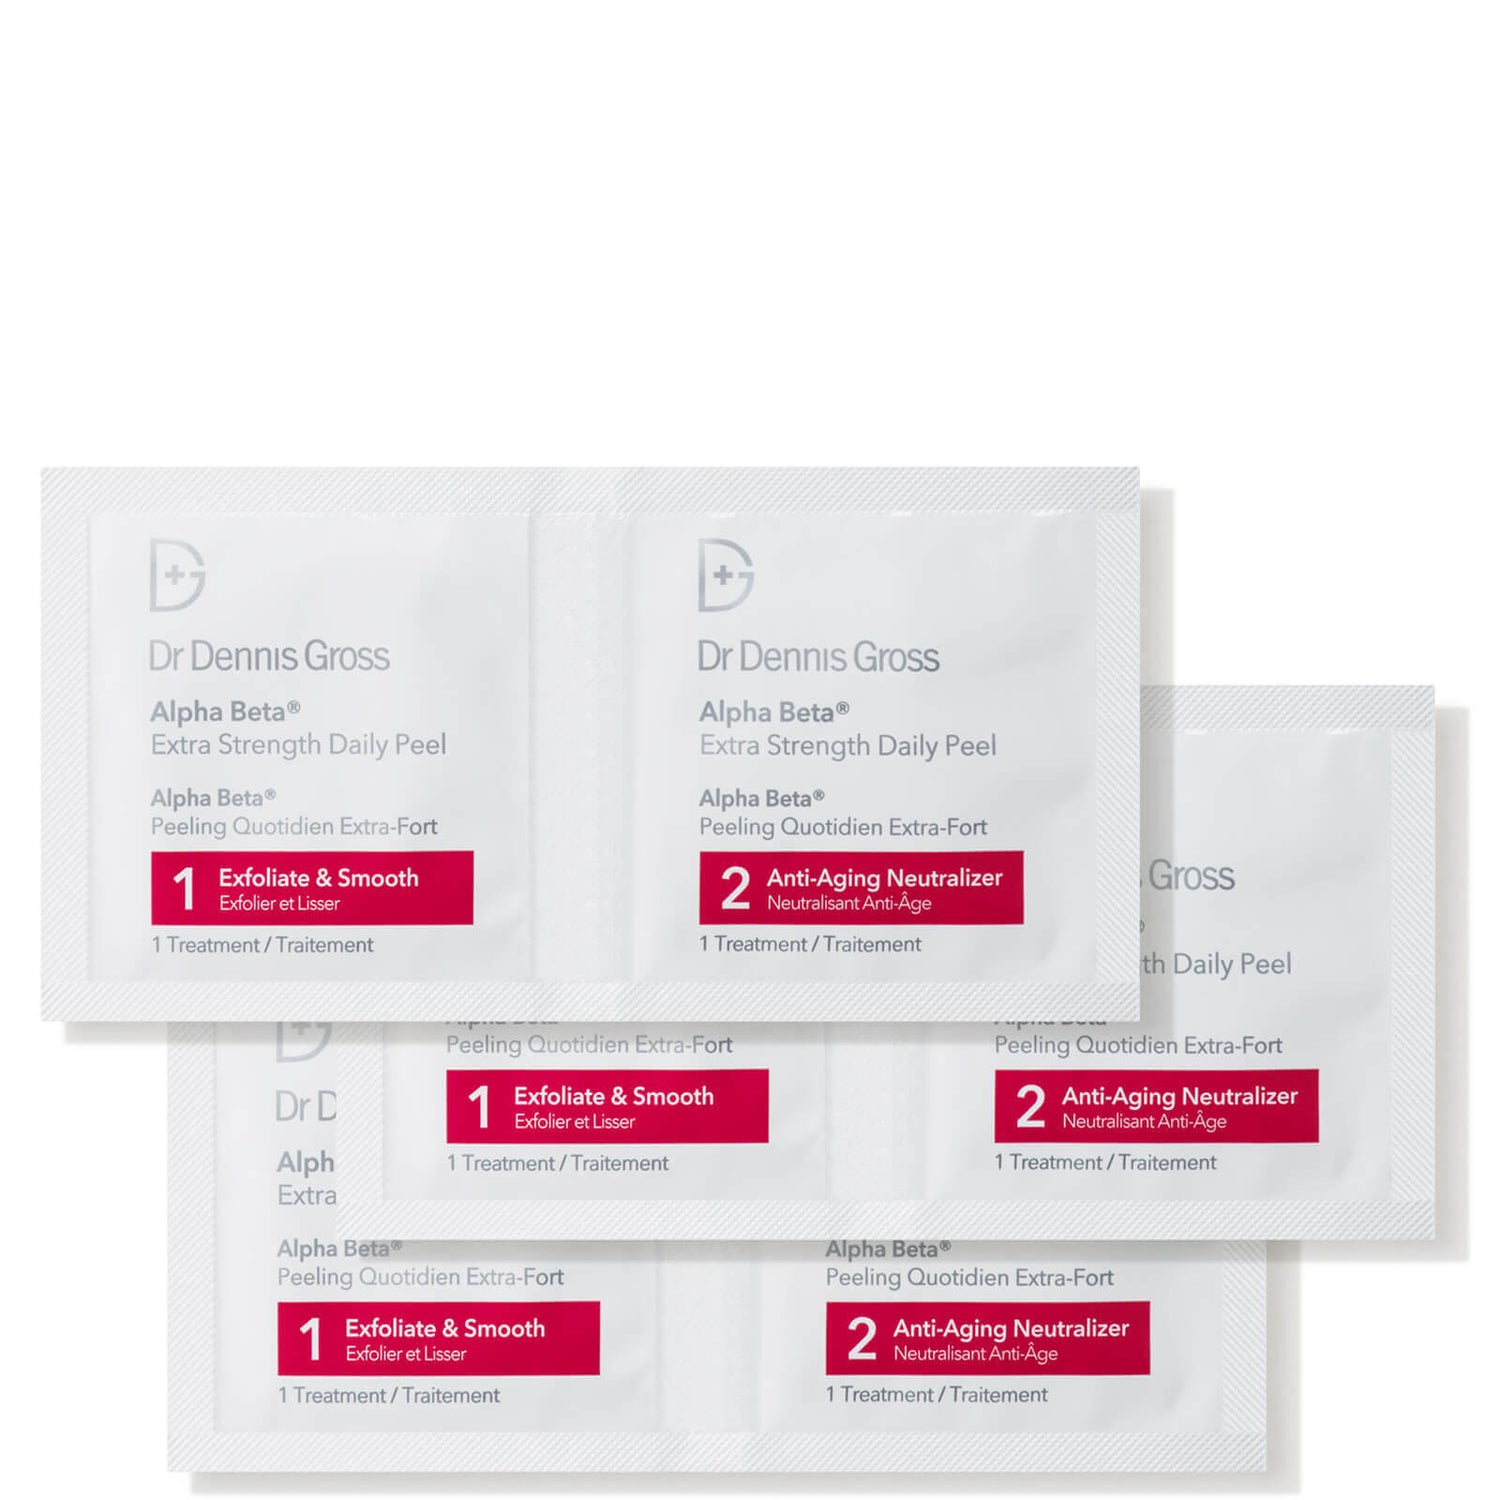 Dr Dennis Gross Alpha Beta Extra Strength Daily Peel - Packettes 